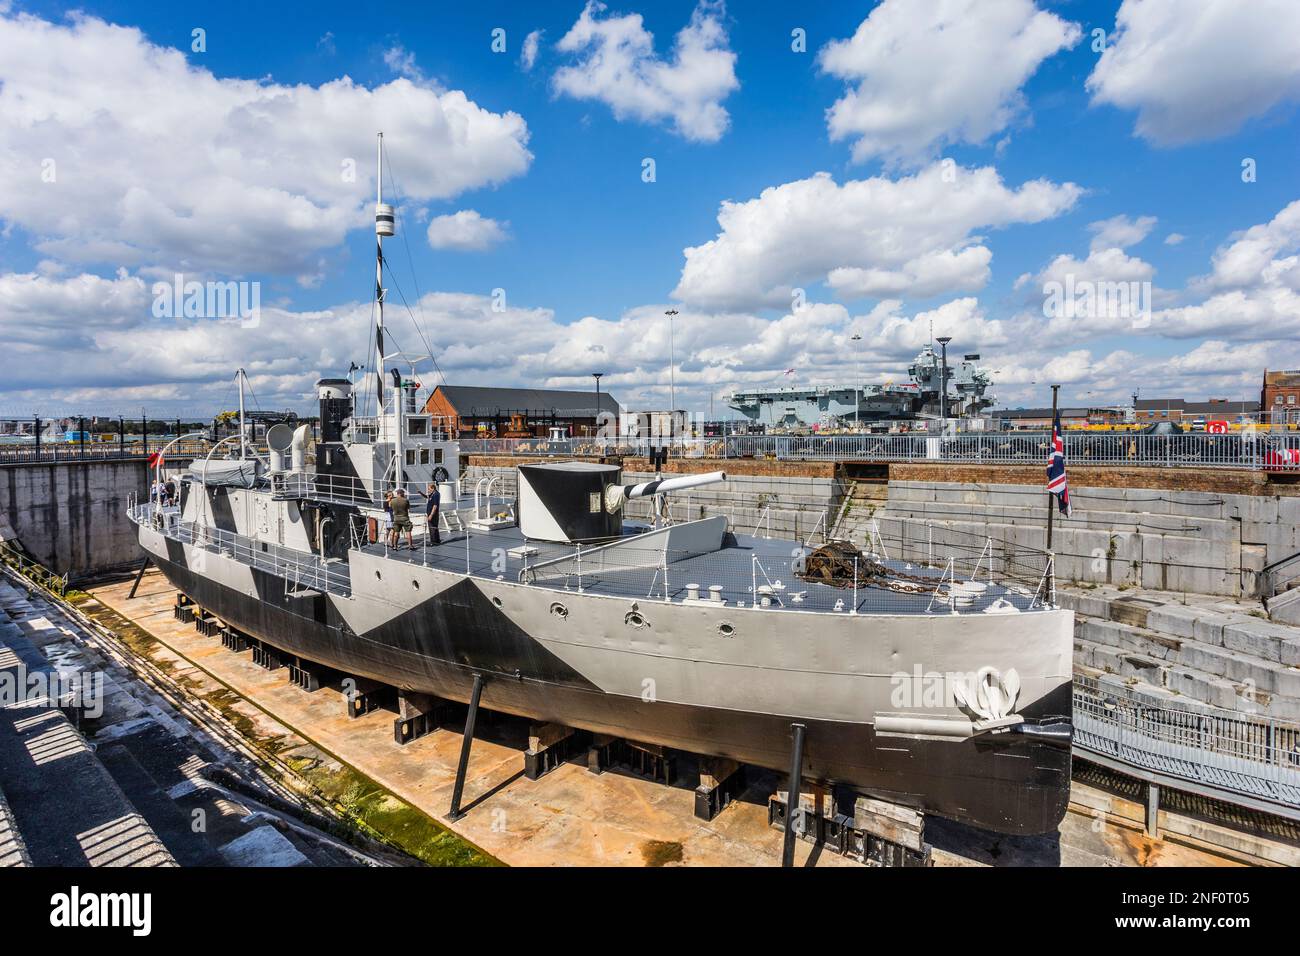 HMS M33, coastal bombardment 'monitor' gunboat, supported the landings at Gallipoli in 1915, exhibit in a dry dock at Portsmouth Historic Dockyard, Ha Stock Photo